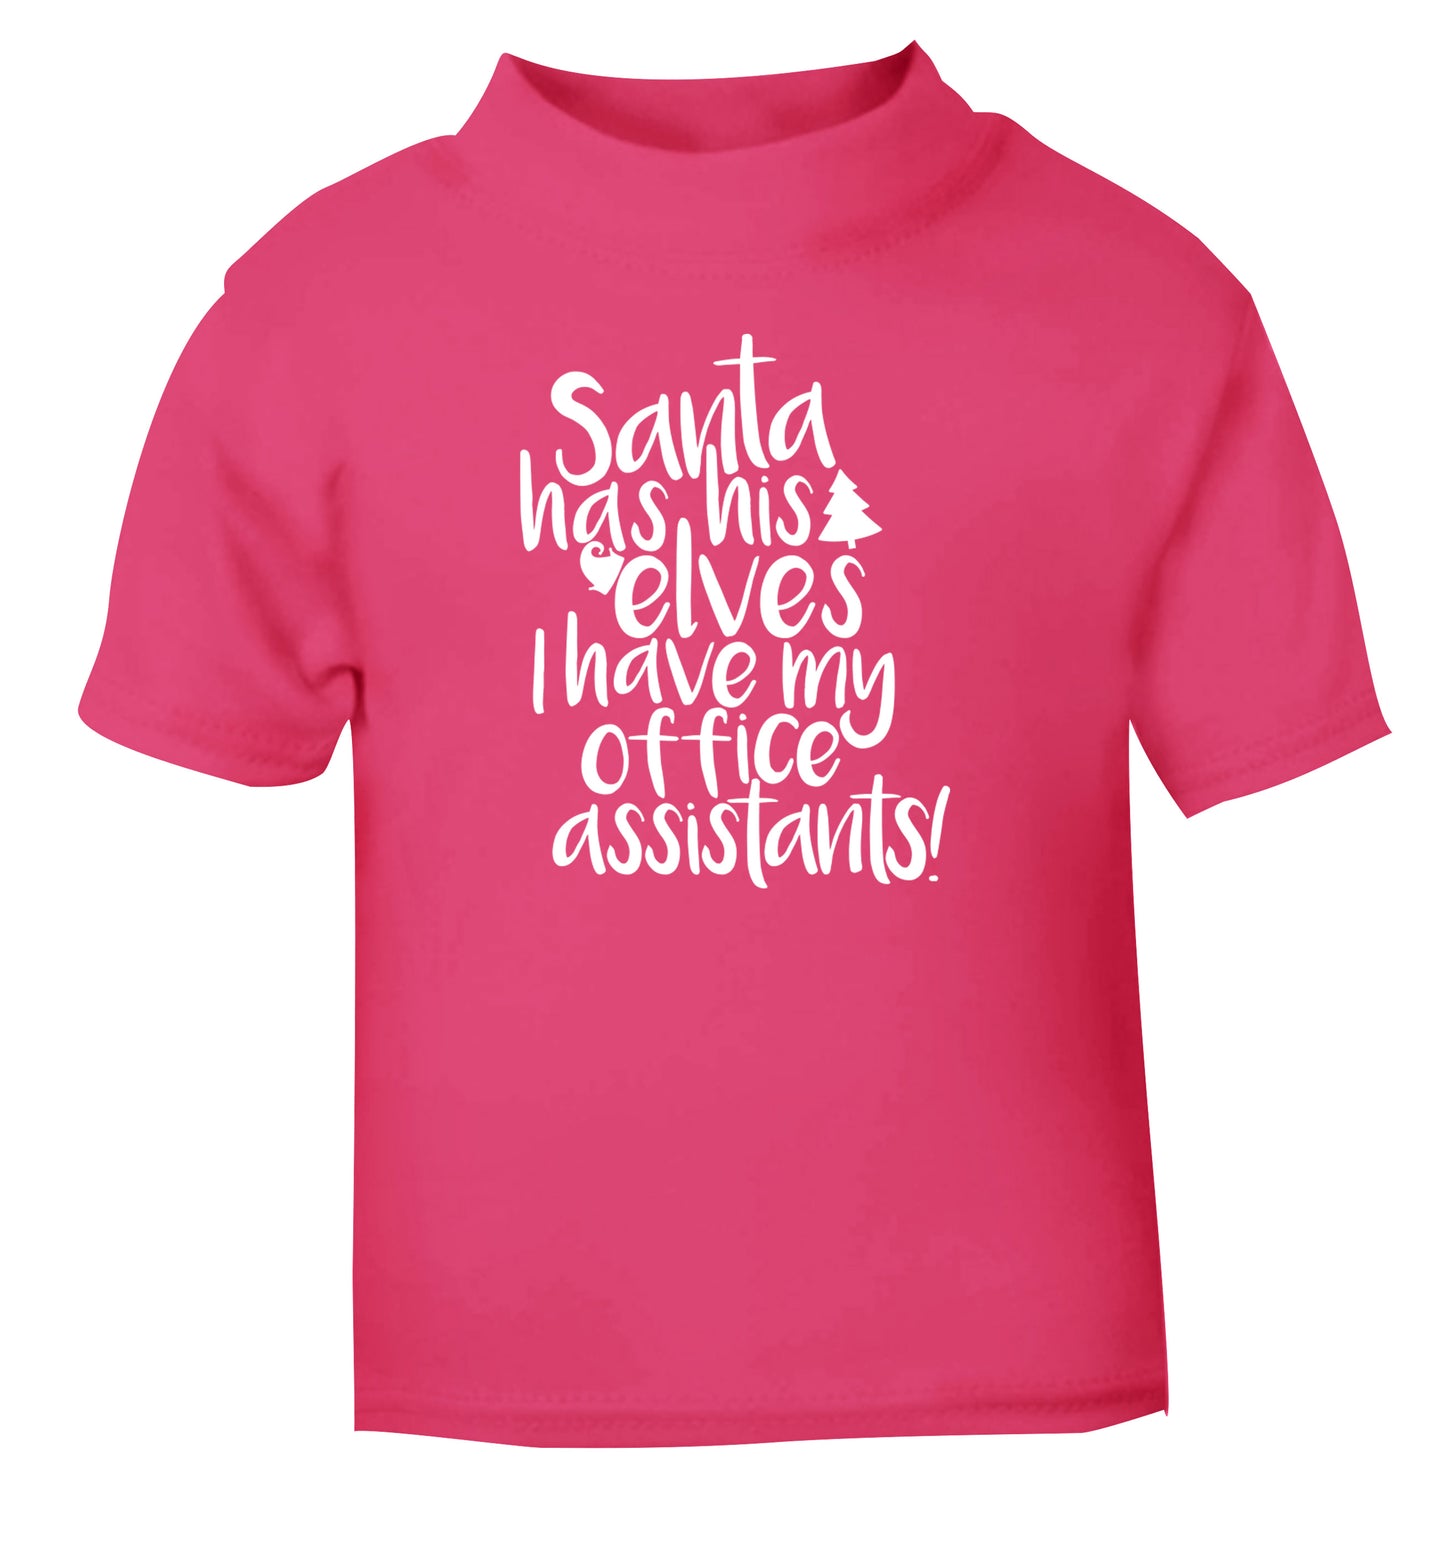 Santa has elves I have office assistants pink Baby Toddler Tshirt 2 Years